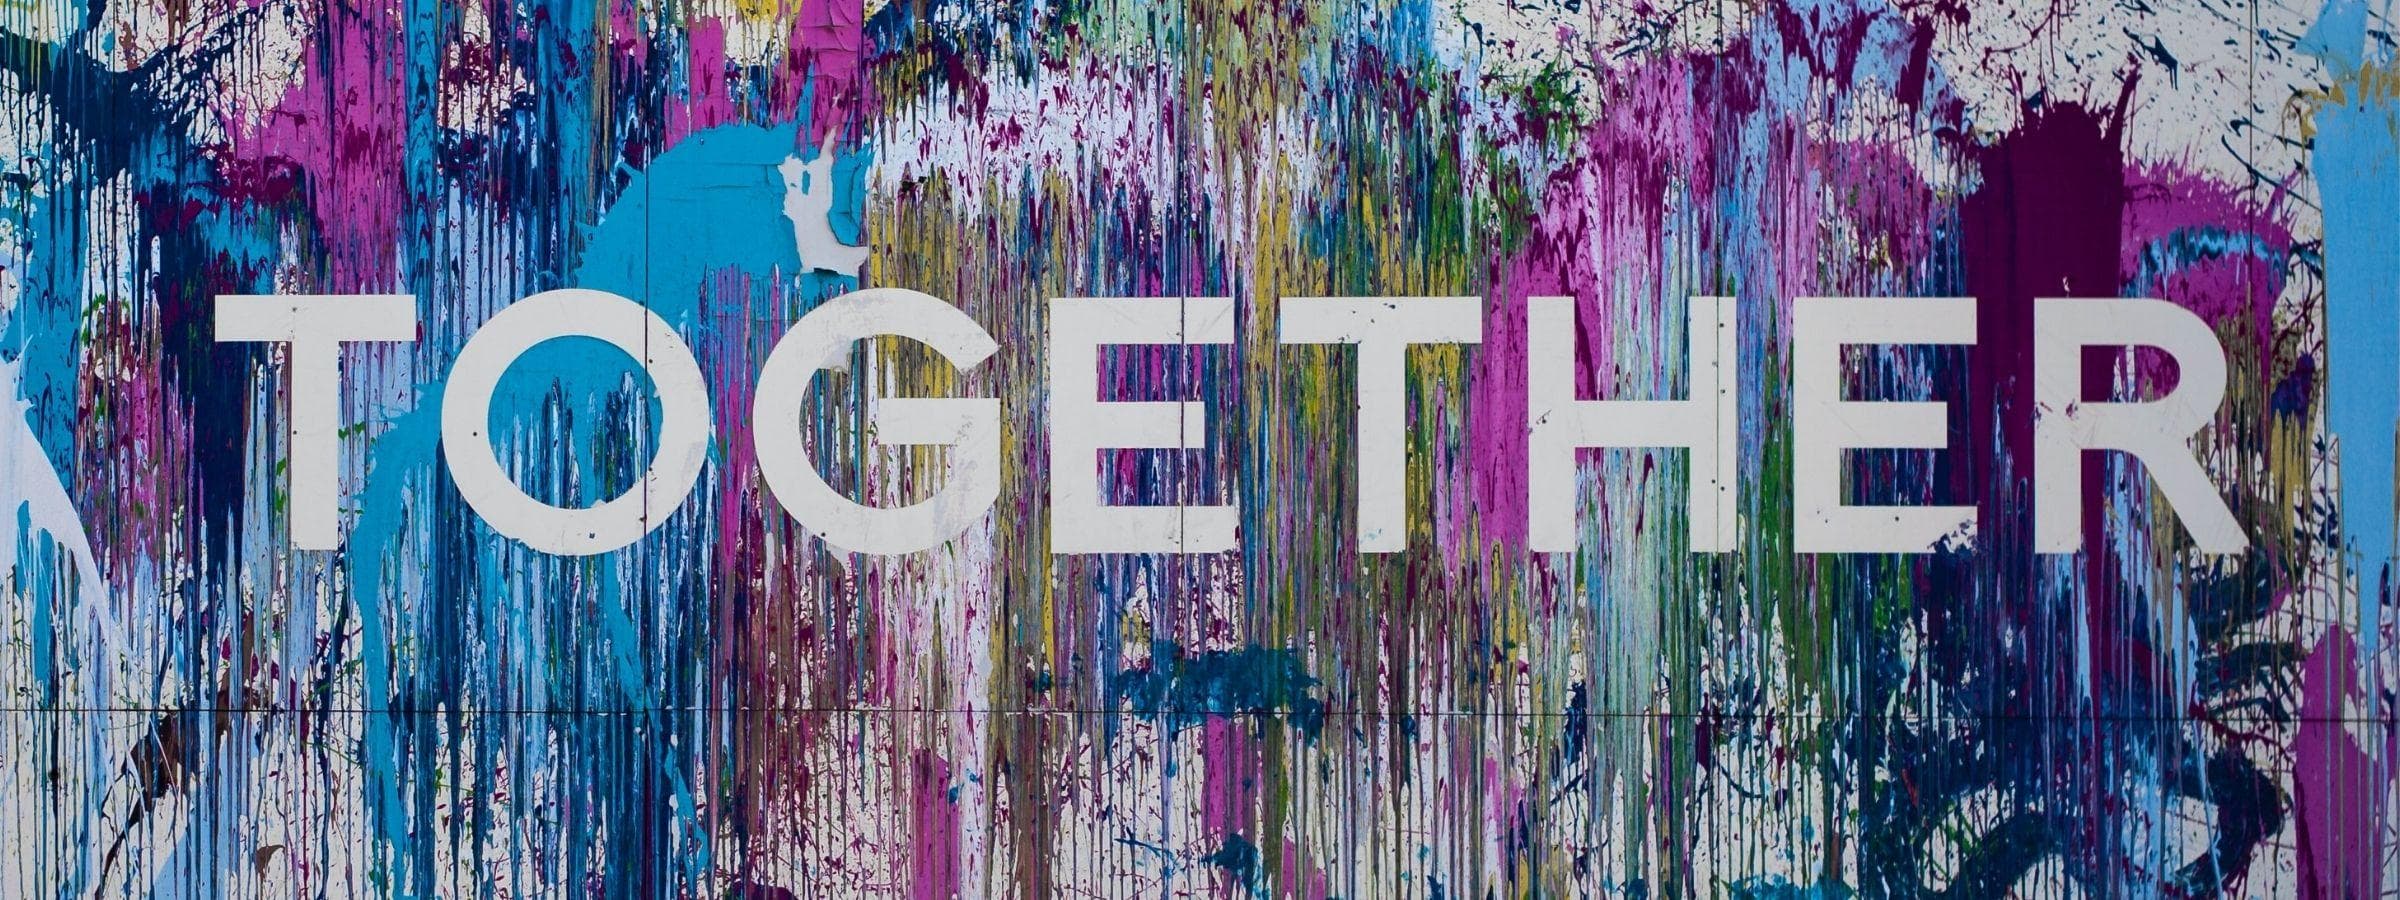 Photo of a wall with streaks of paint with the text "TOGETHER".